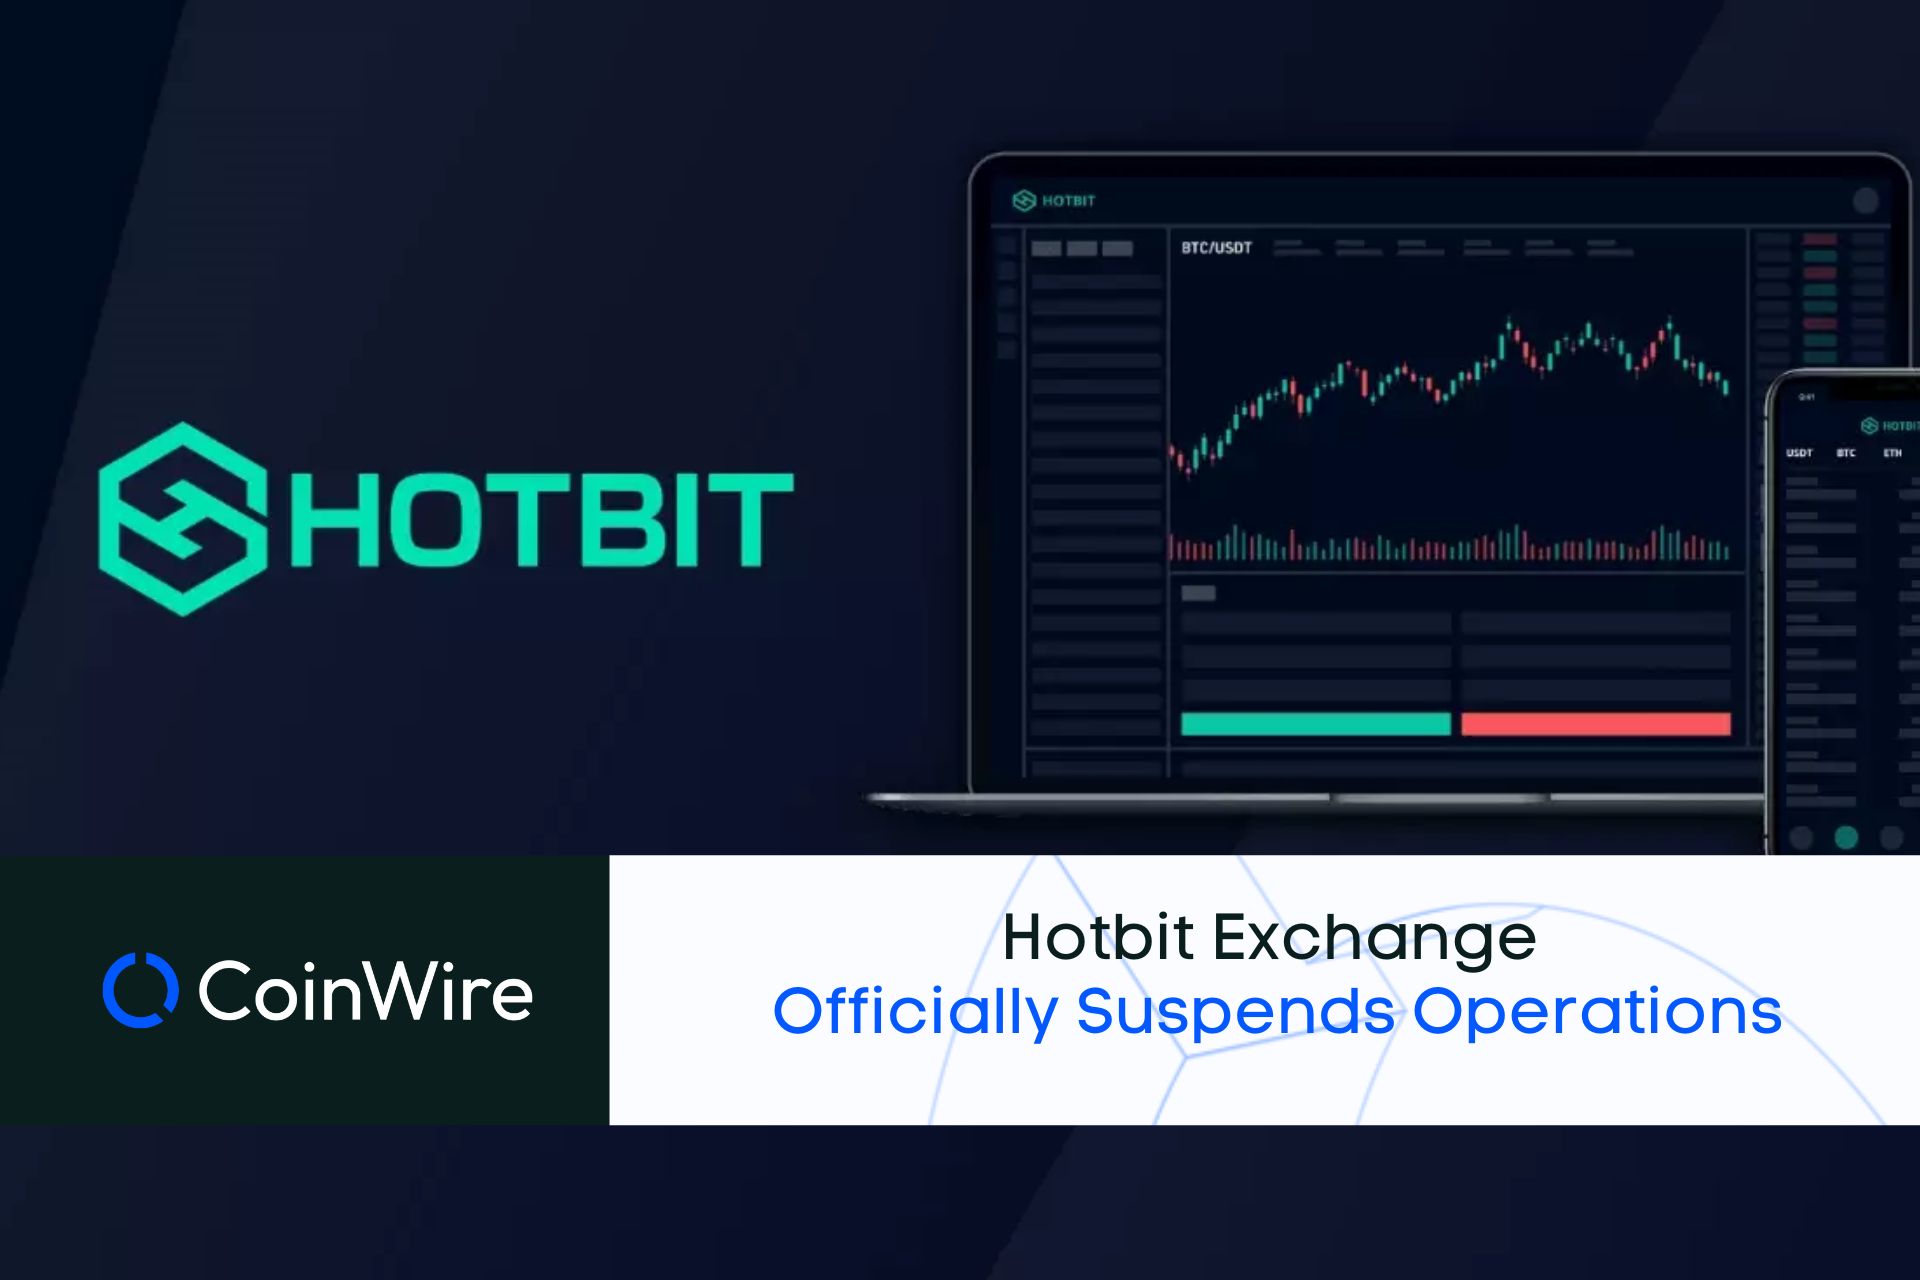 Hotbit Exchange Officially Suspends Operations